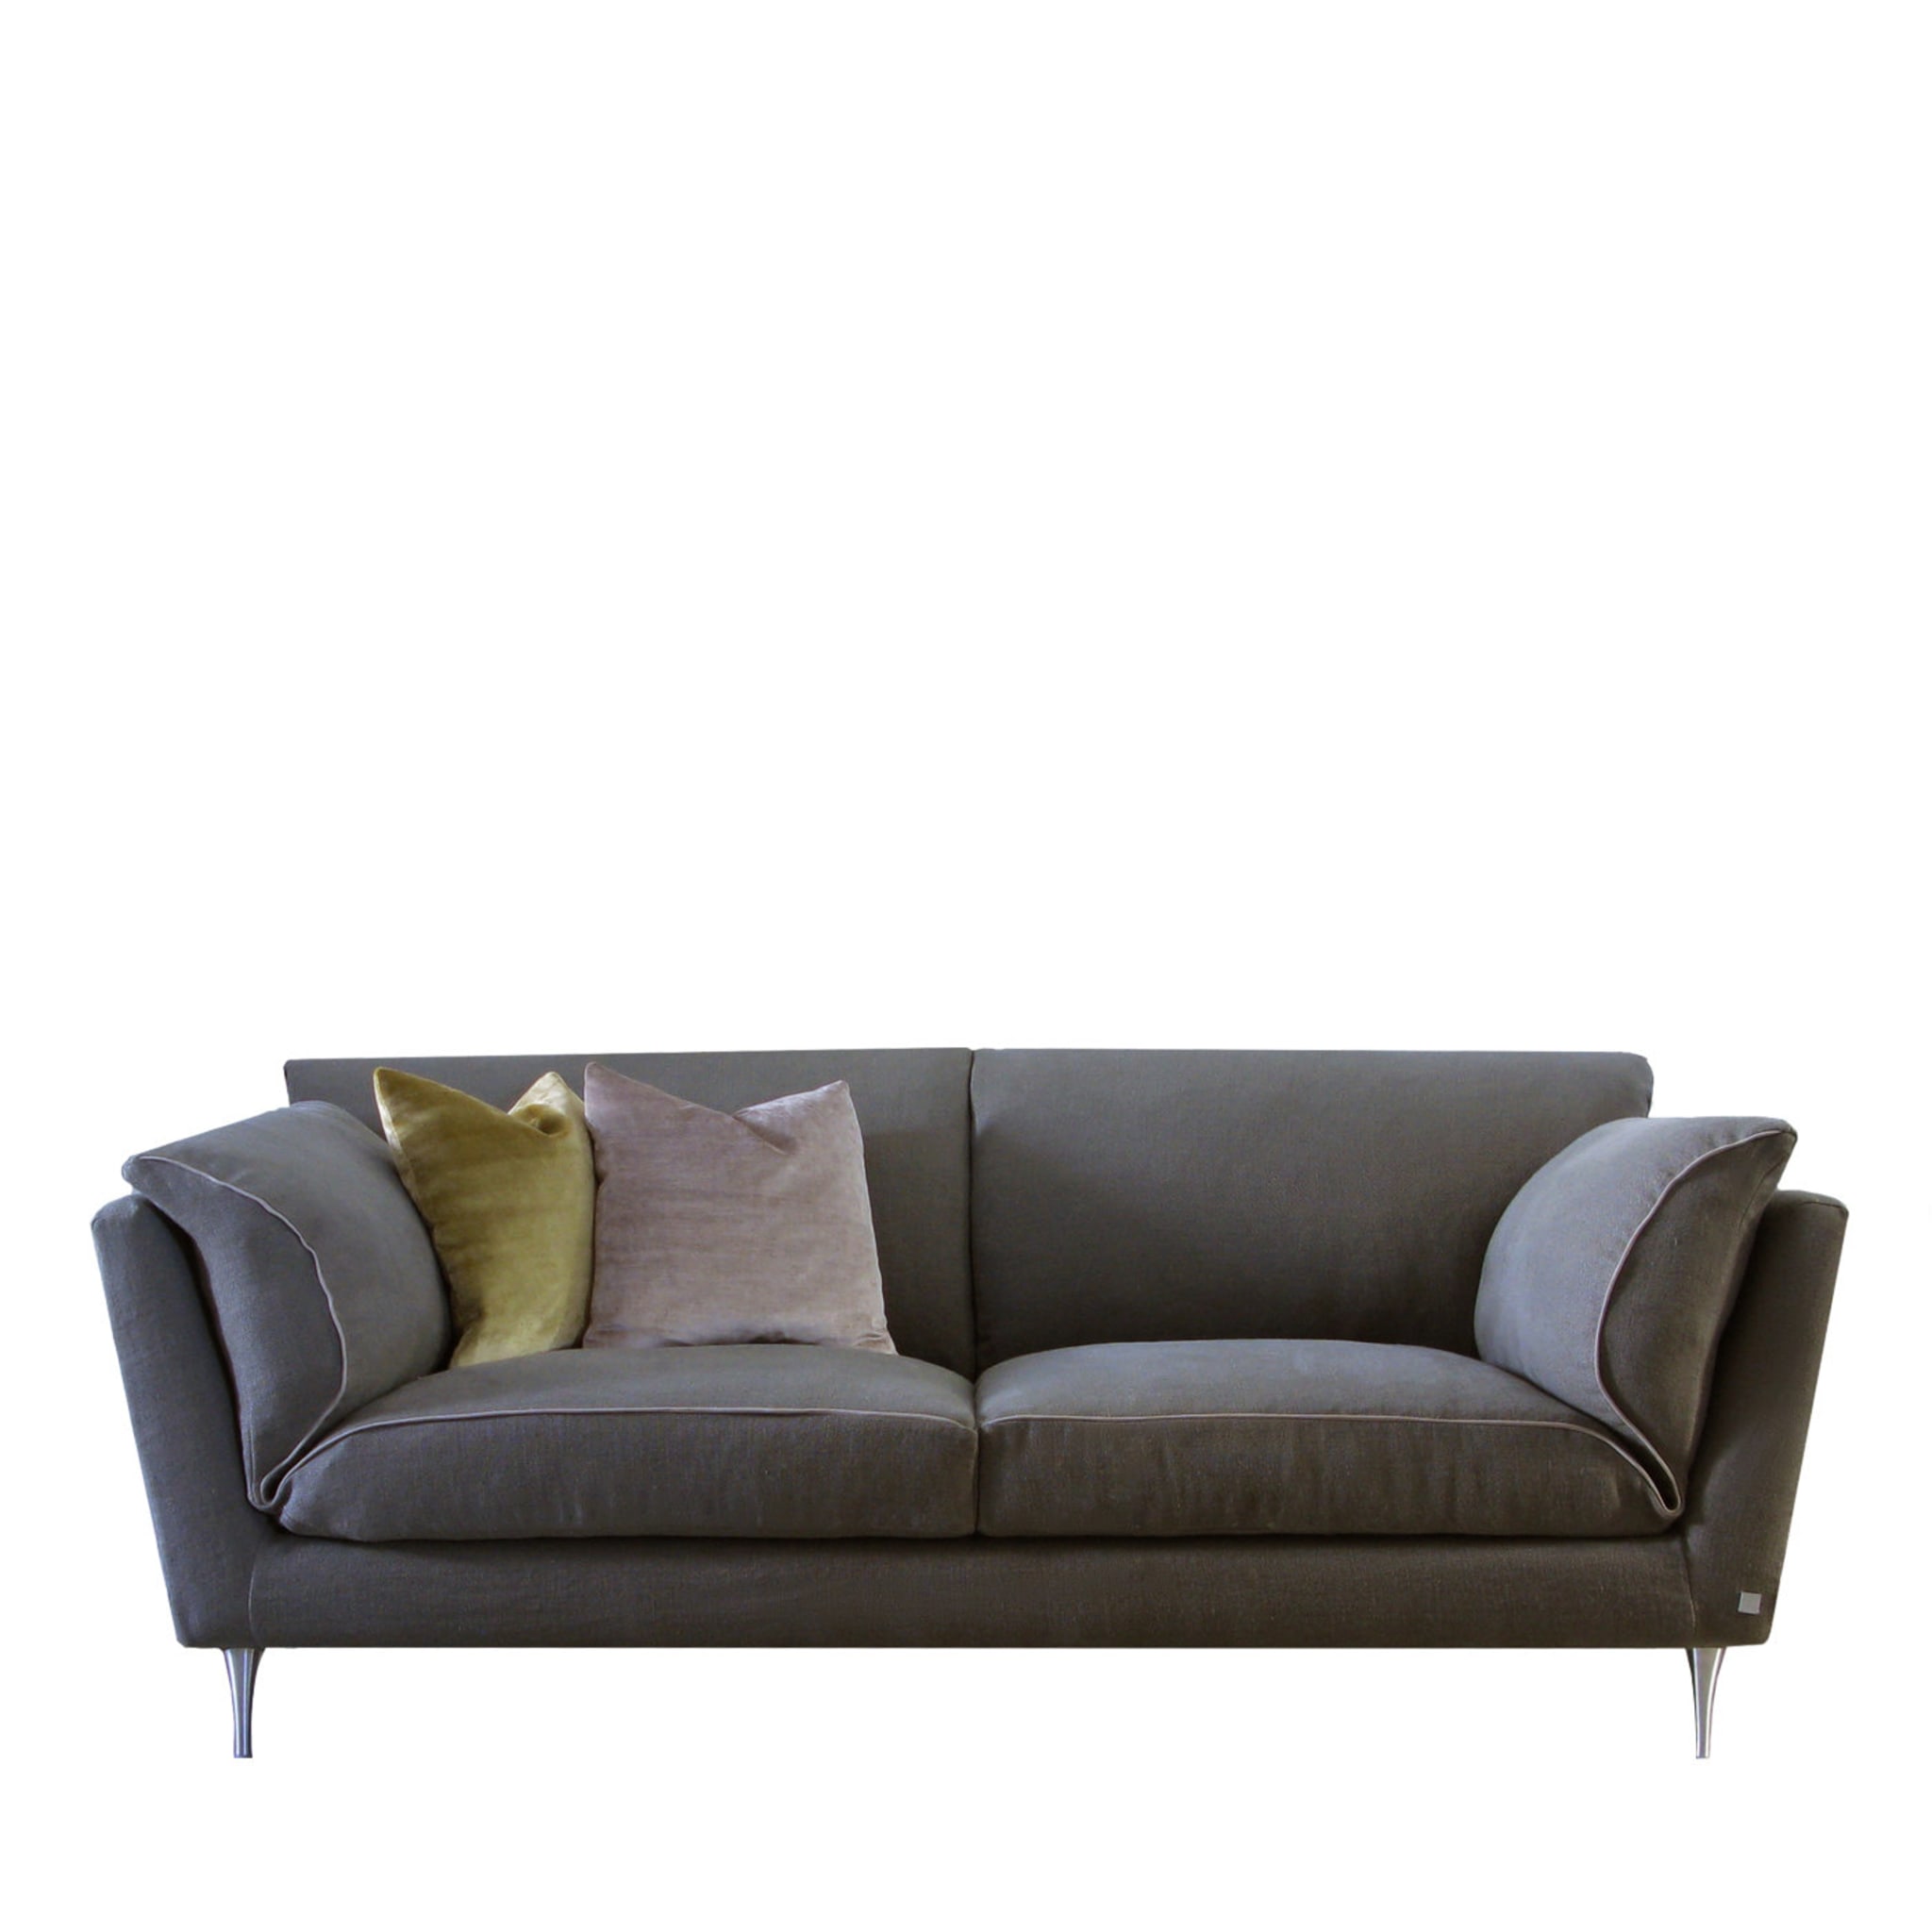 Casquet Ecological Beige Sofa by DDP Studio  - Main view